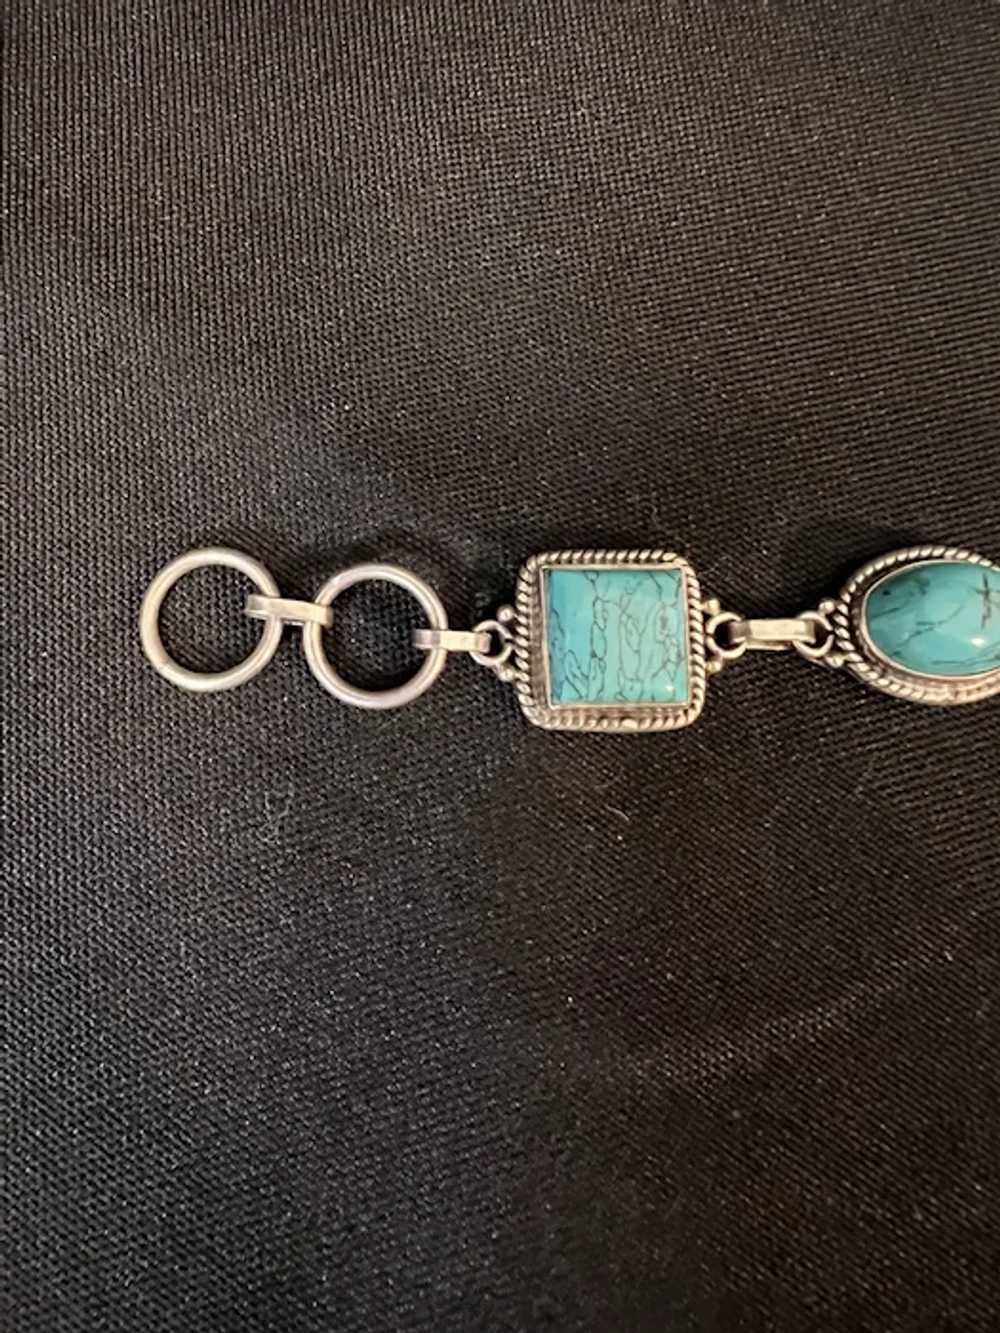 925 Sterling Silver and Turquoise Bracelet - image 5